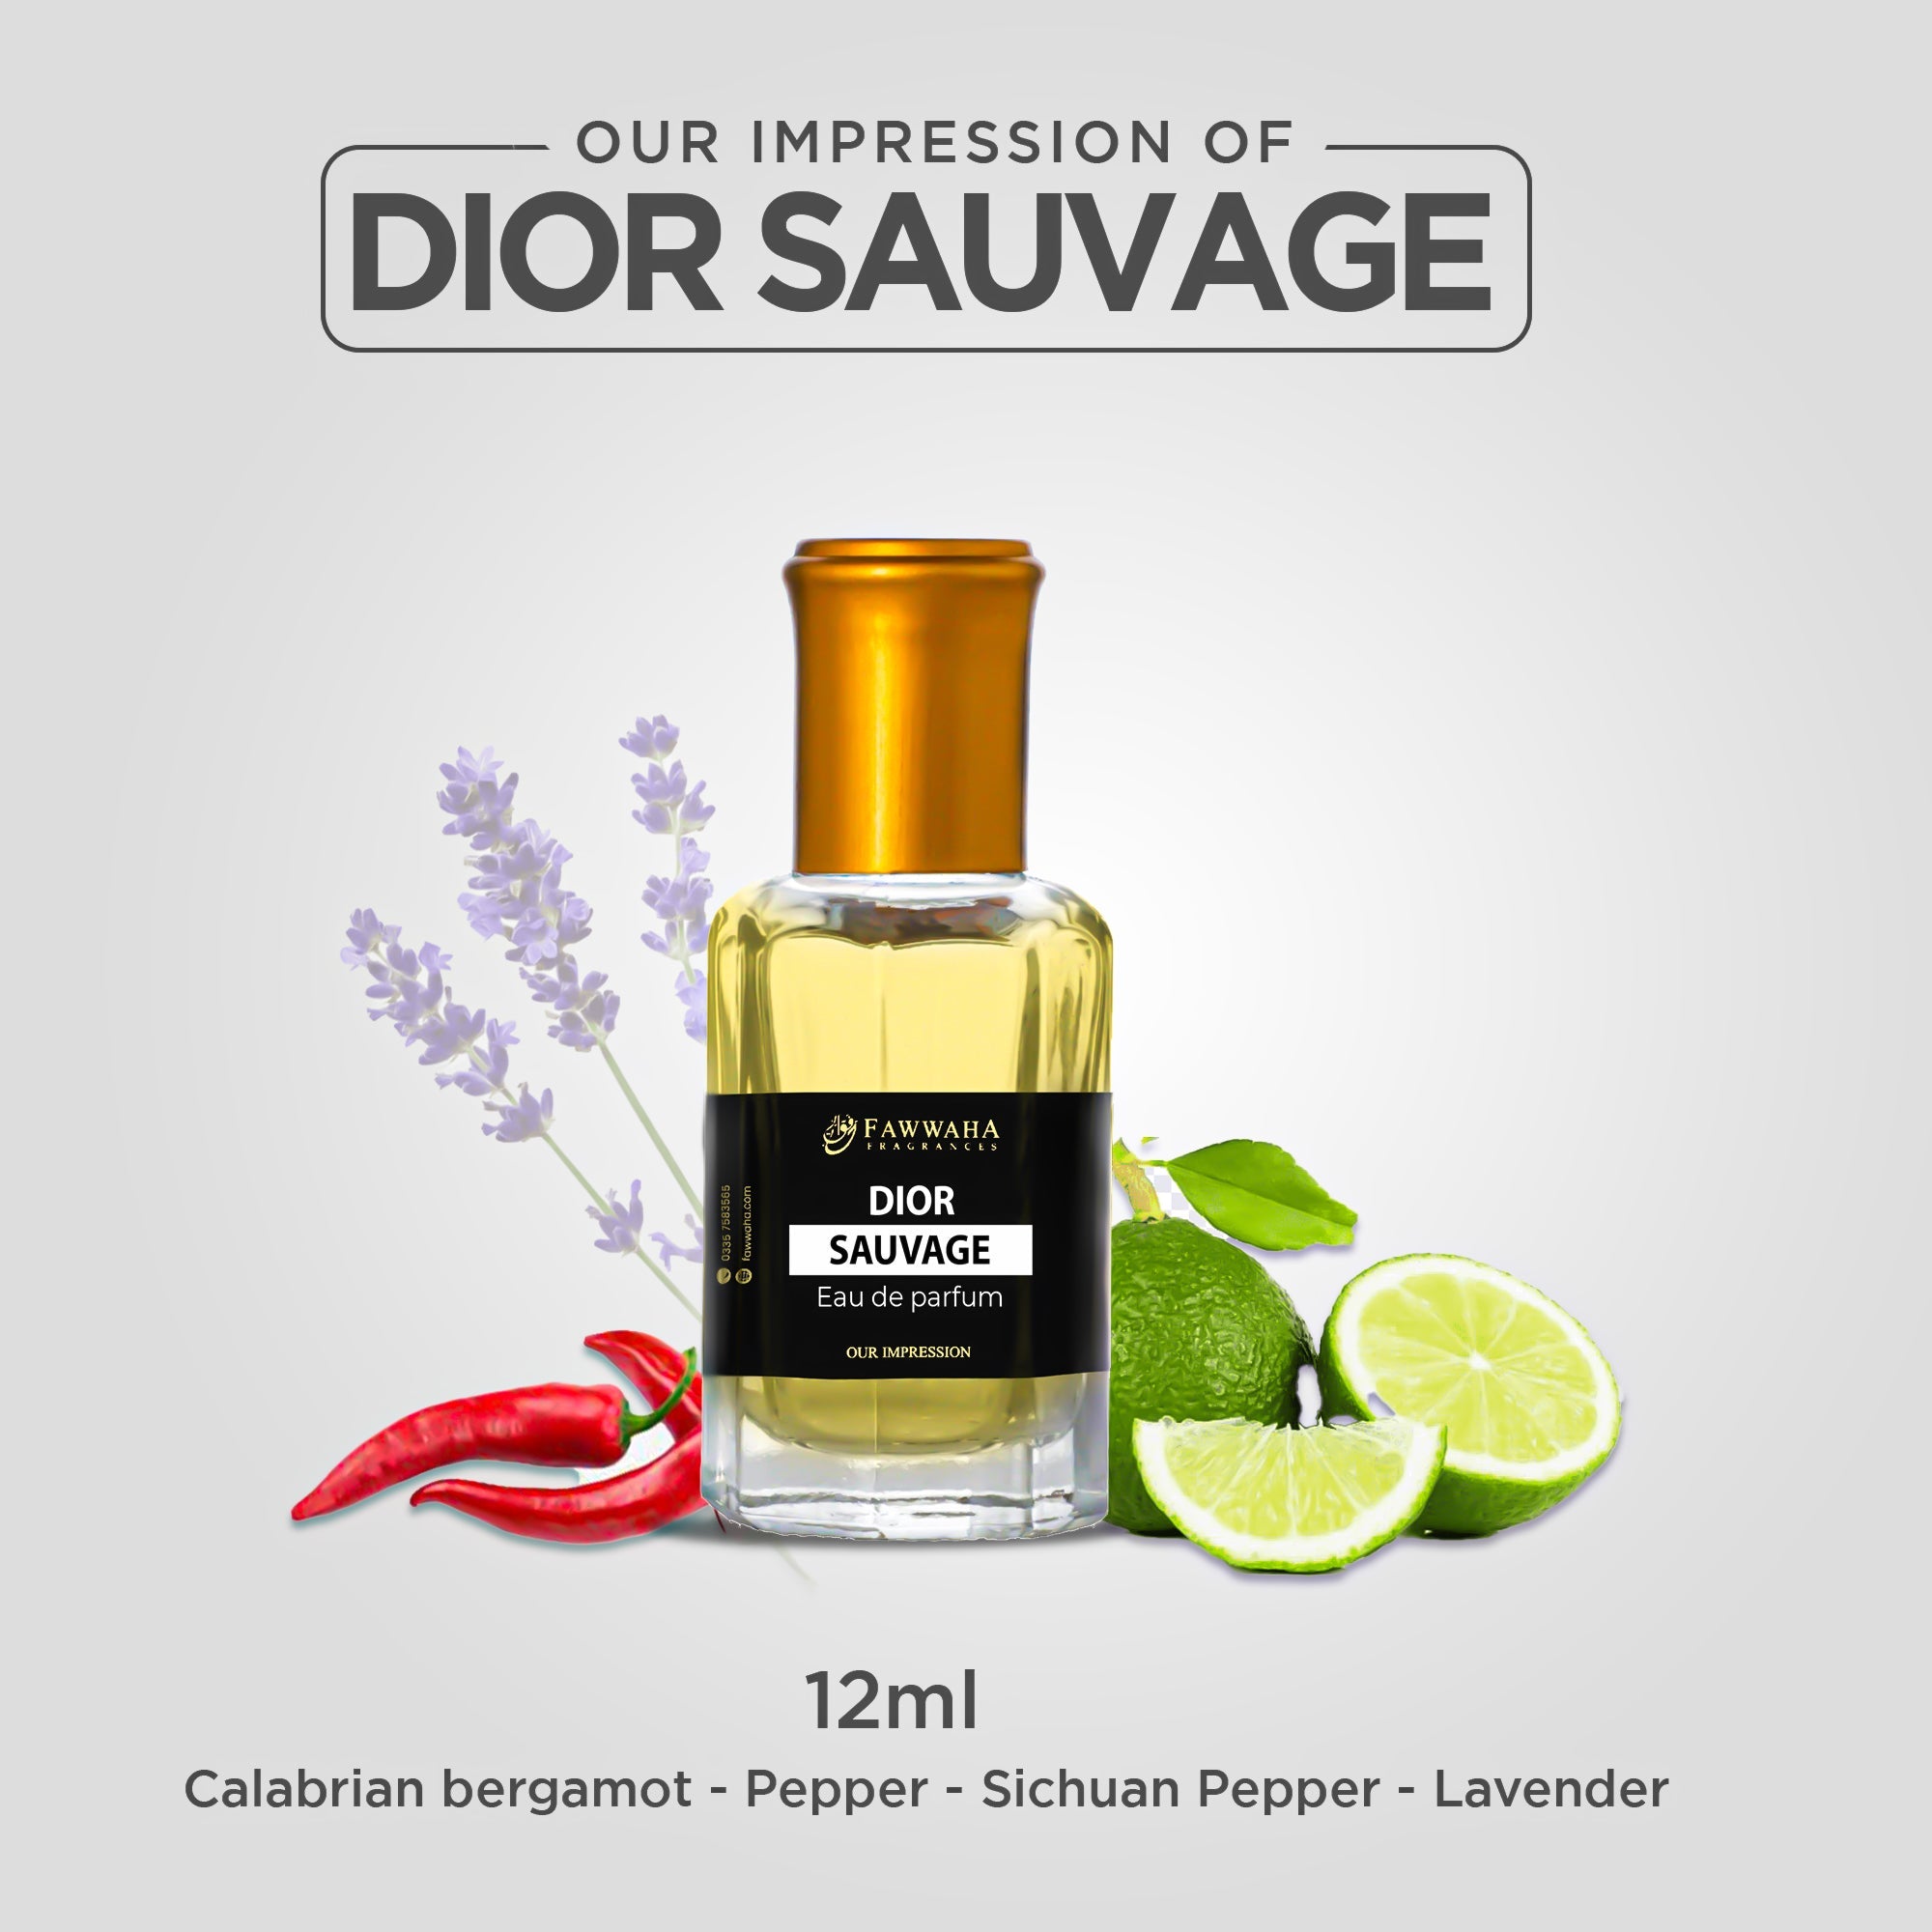 ZIMAM (OUR IMPRESSION OF DIOR SAUVAGE) (12 ML)